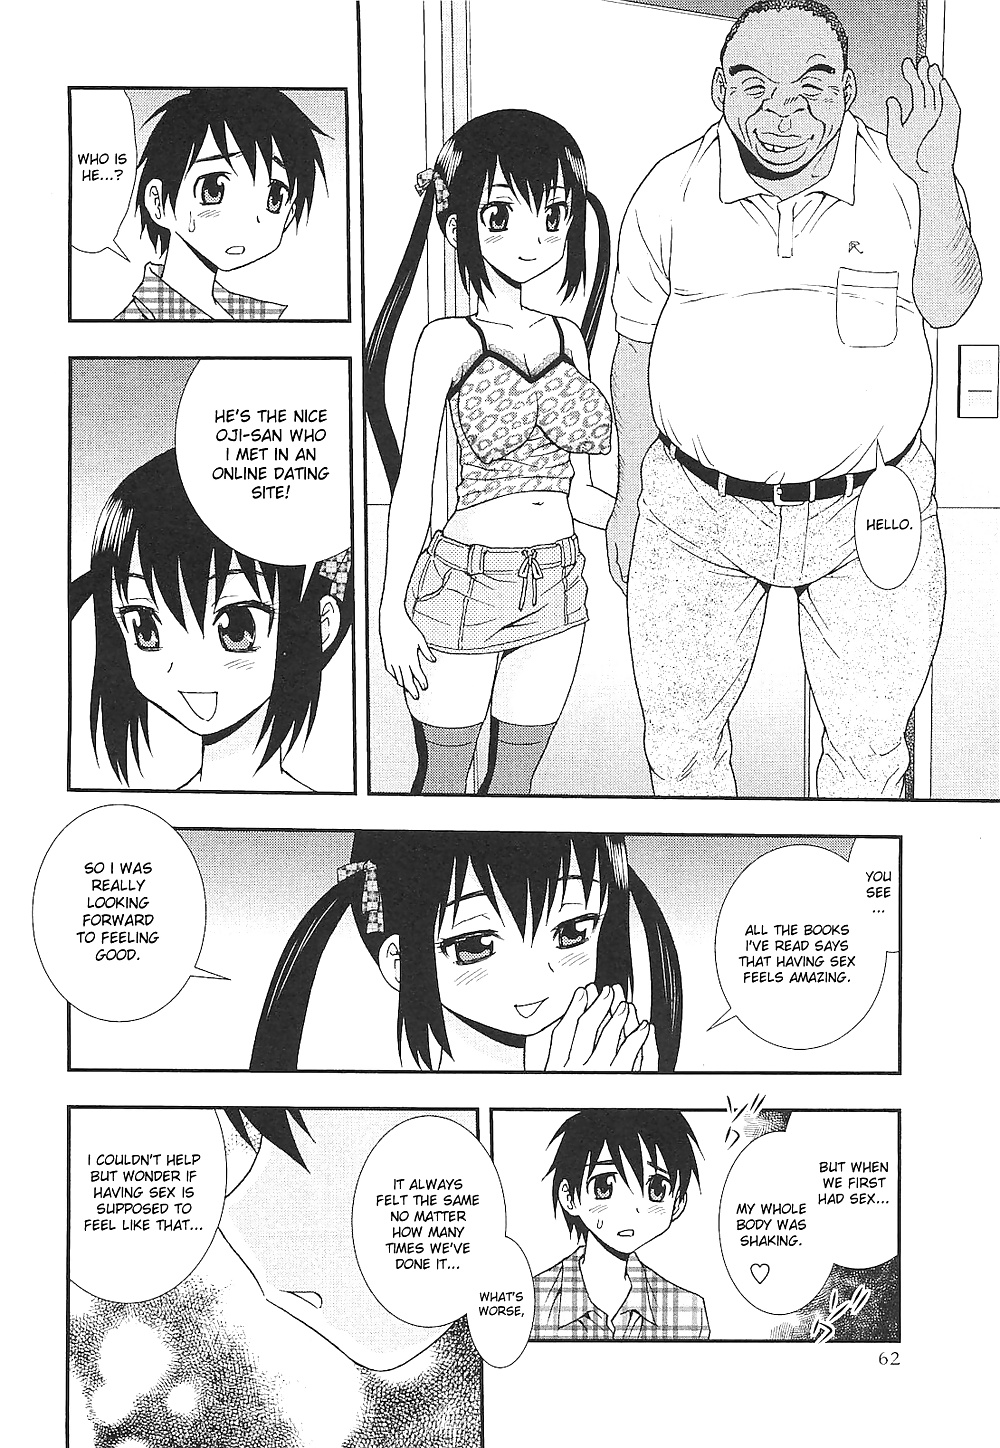 (HENTAI Comic) A Lovely Scenery #24626142